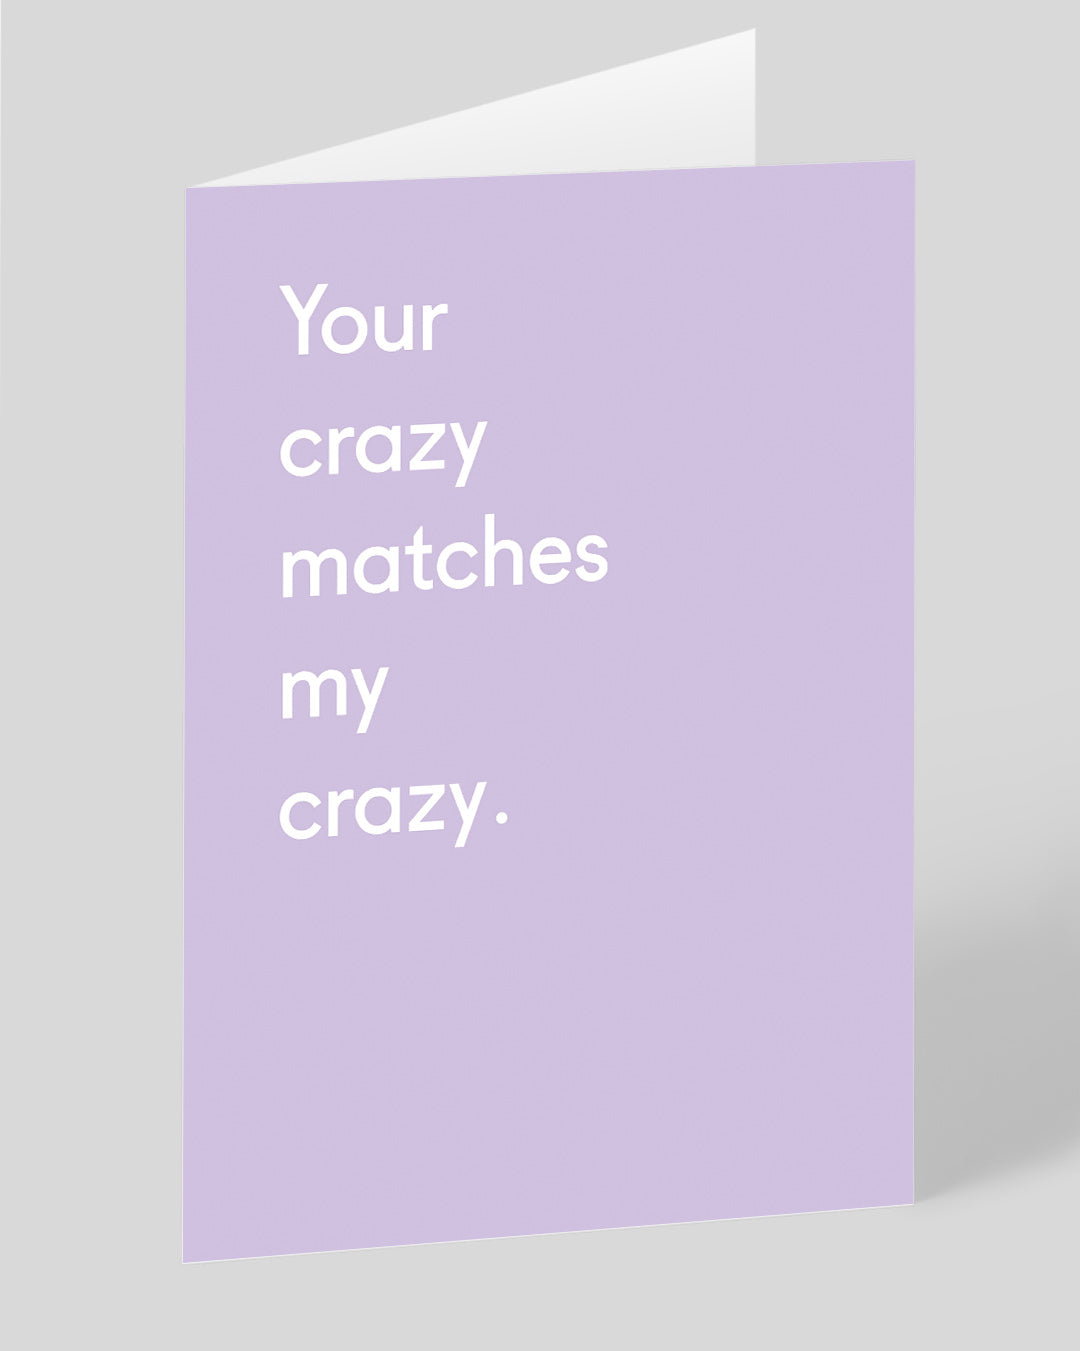 Valentine’s Day | Funny Valentines Card For Him or Her | Funny Birthday Card Your Crazy Matches My Crazy Greeting Card | Ohh Deer Unique Valentine’s Card | Made In The UK, Eco-Friendly Materials, Plastic Free Packaging